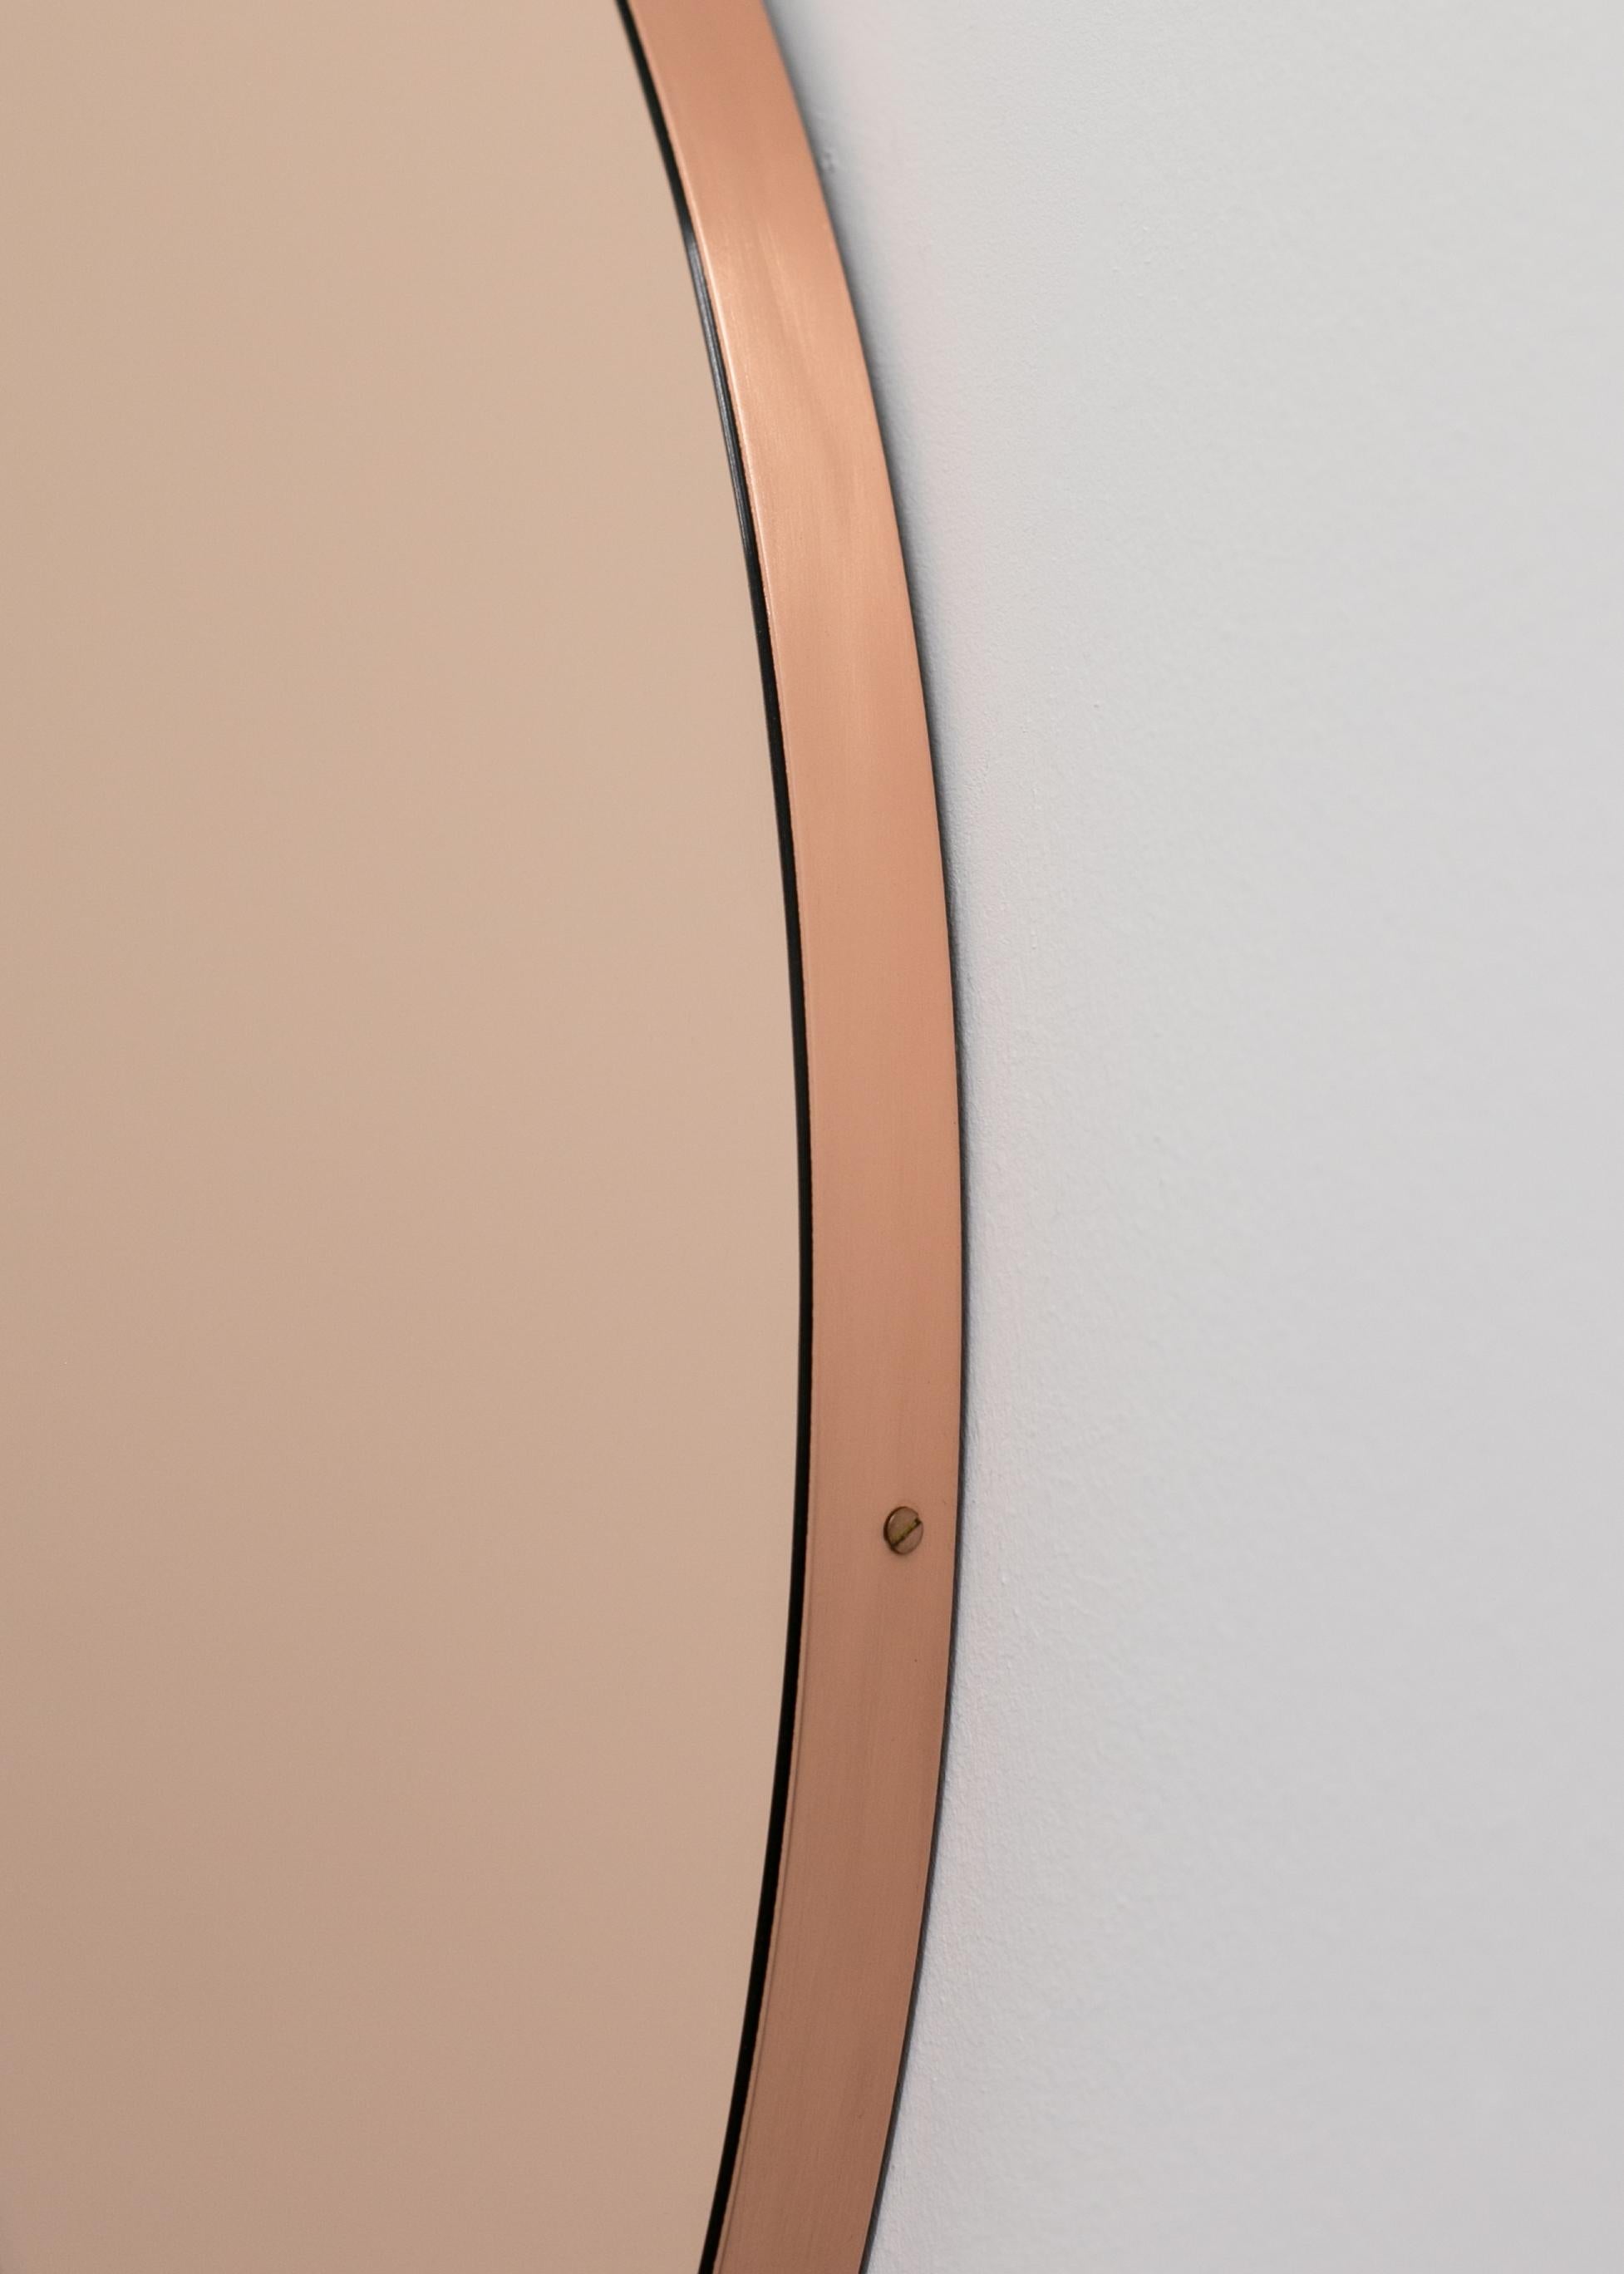 British Ovalis Oval shaped Rose Gold Contemporary Mirror with a Copper Frame, Small For Sale